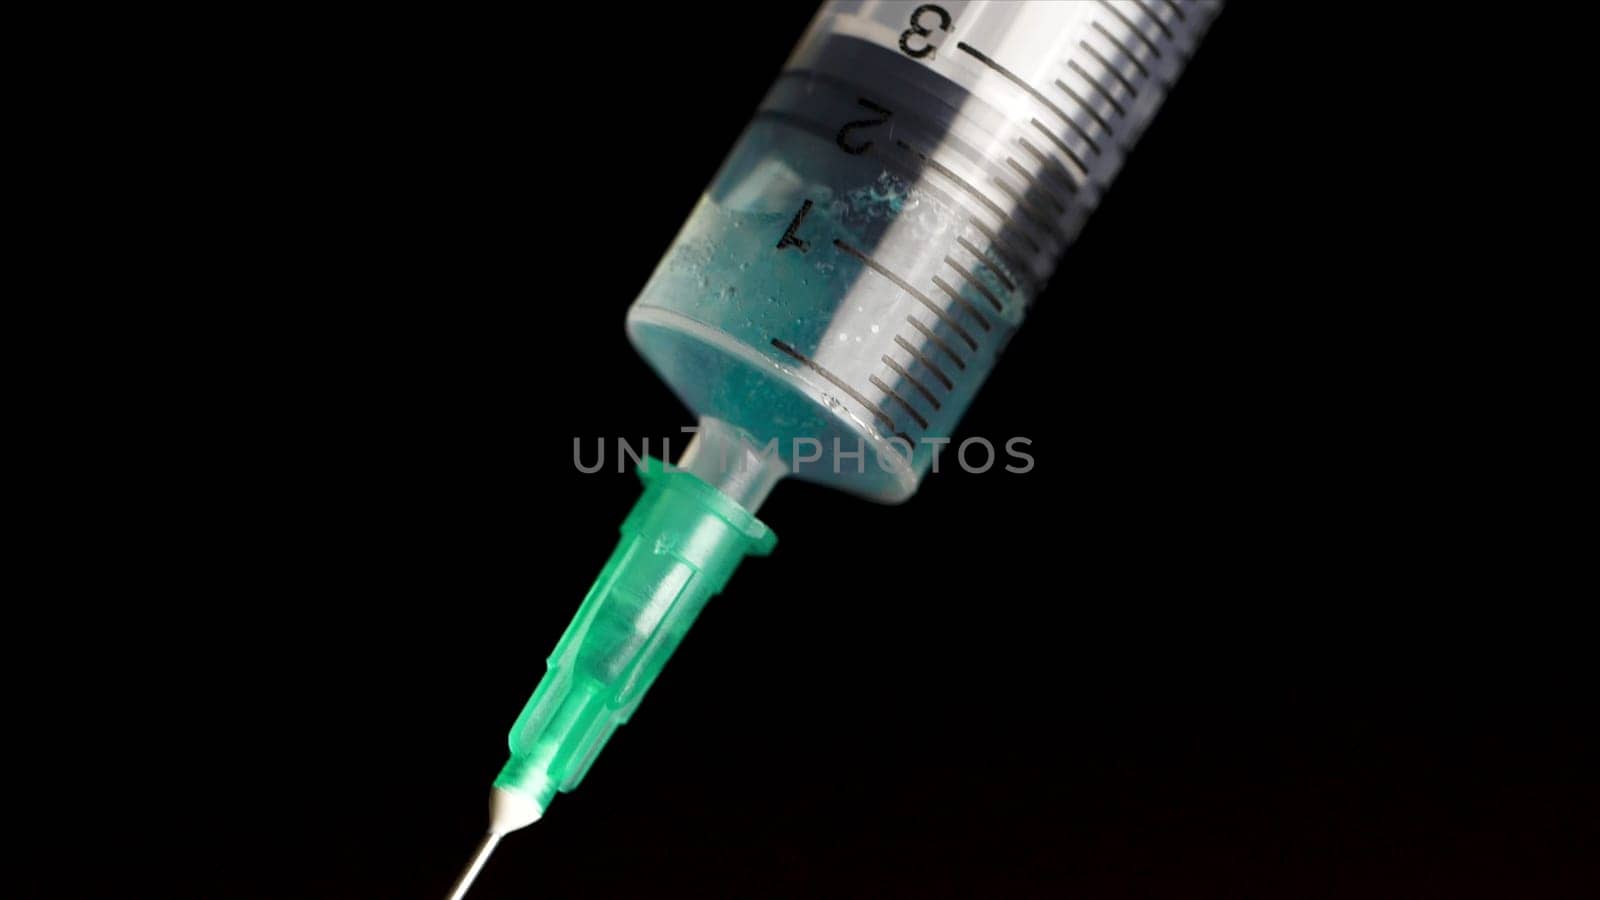 Taking vaccine into a glass syringe from a ampule on a black background. Closeup. Syringe is typed in turquoise fluid injection from illness serious illnesses, the concept of medicine.